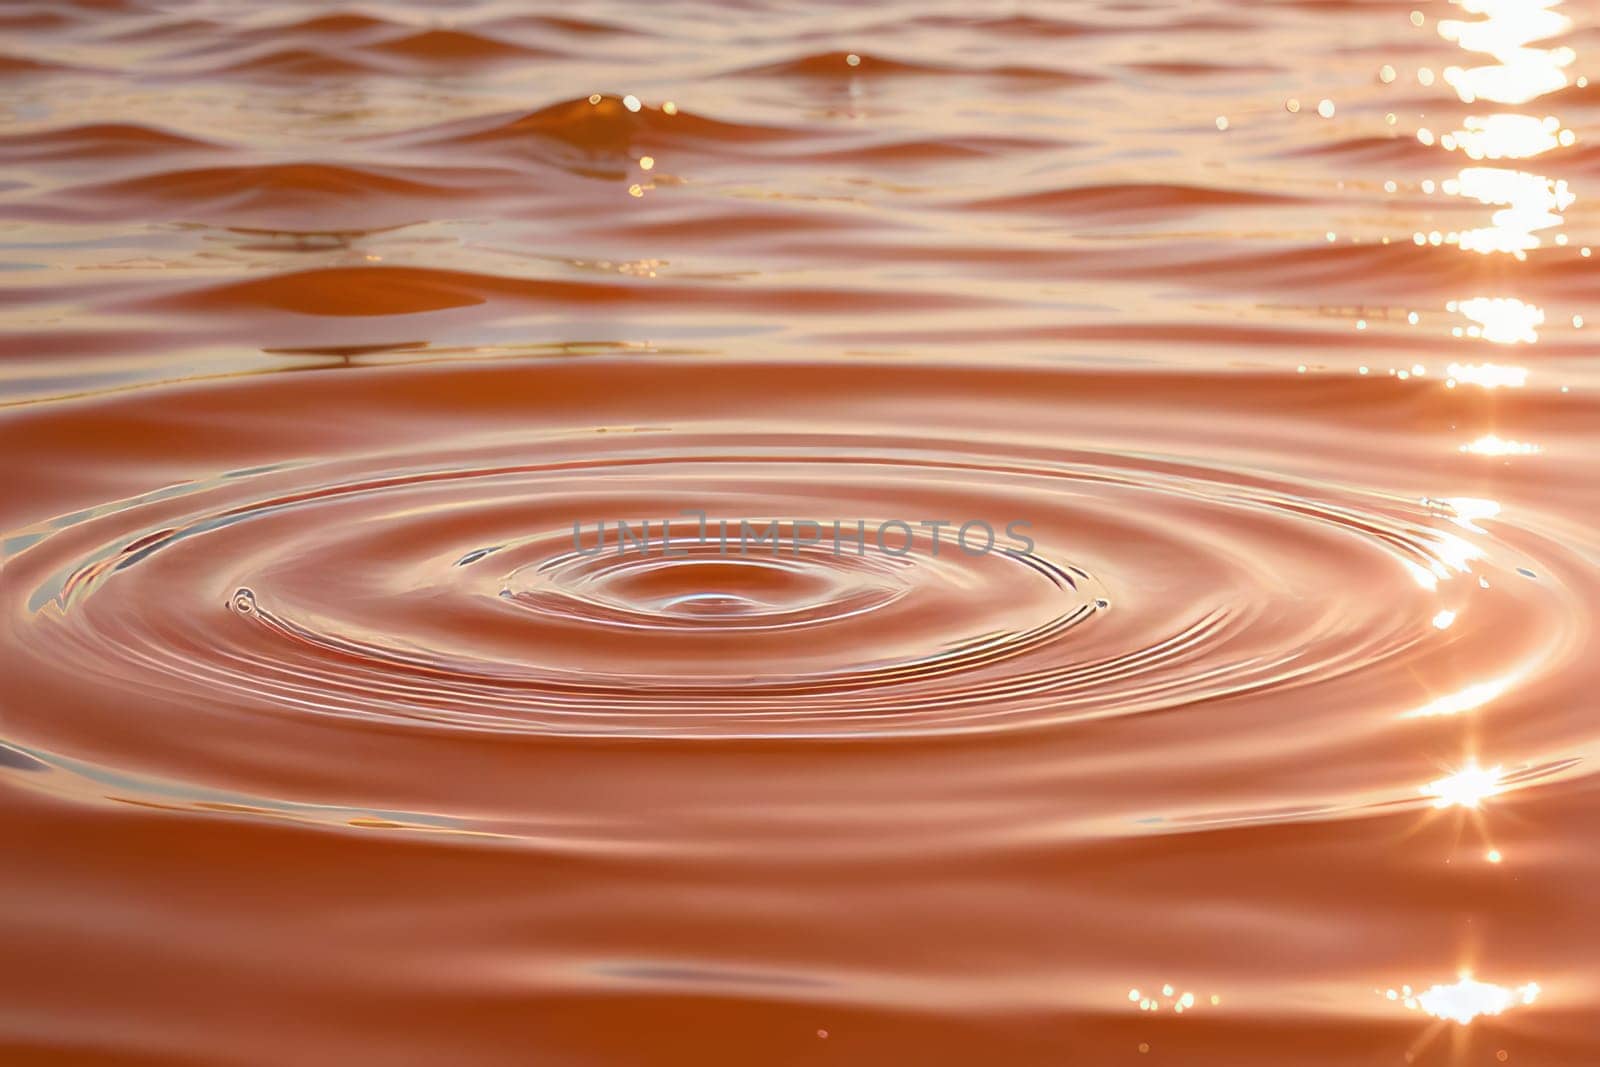 Circles and waves on peach-colored water in sunlight Abstract natural background. by Annu1tochka